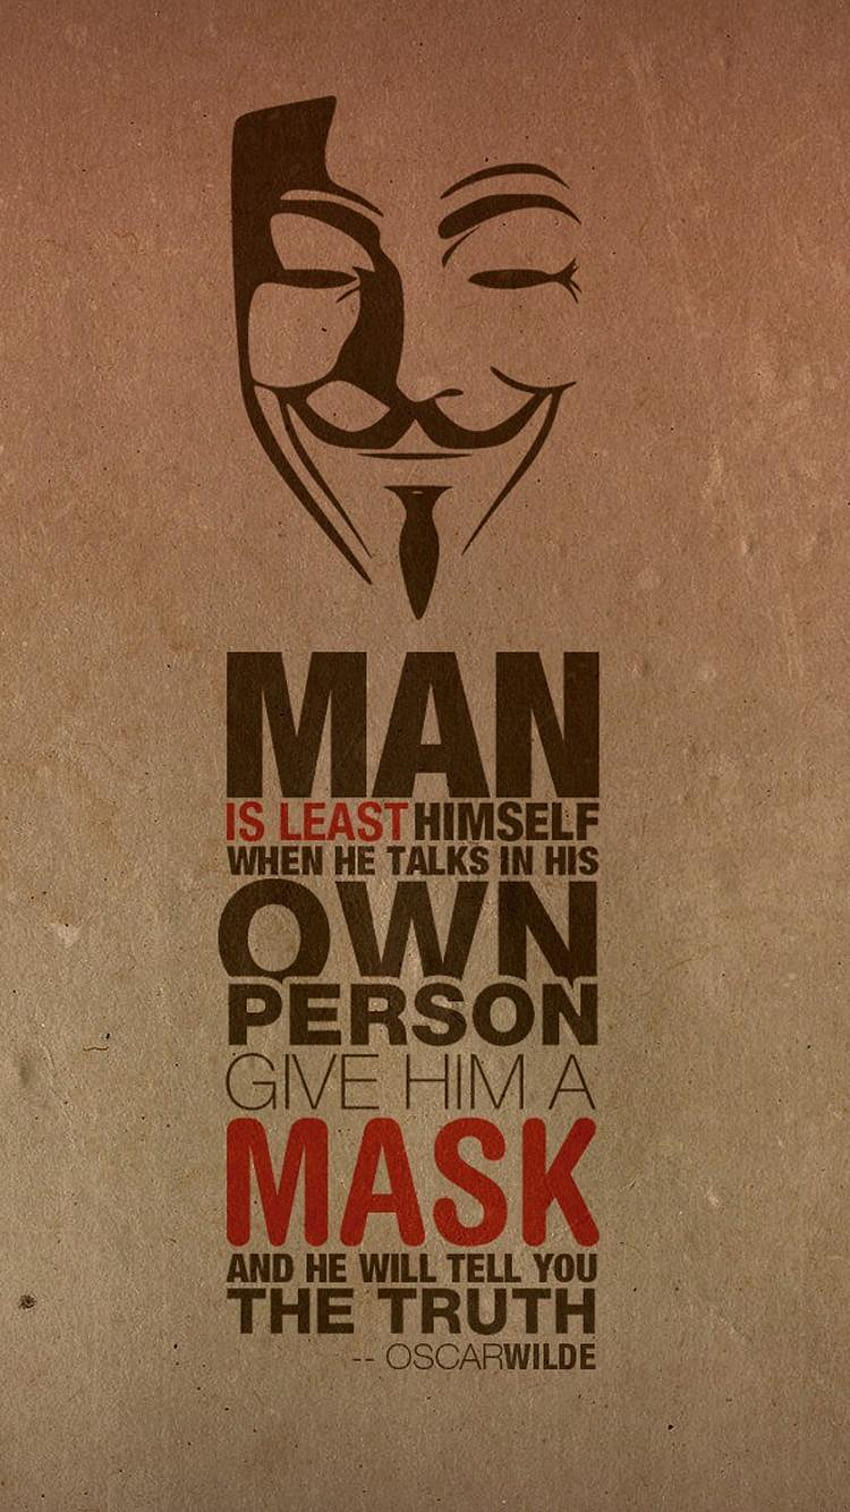 Truth Mask Oscar Wilde Quote – Mobile, mask mobile HD phone wallpaper